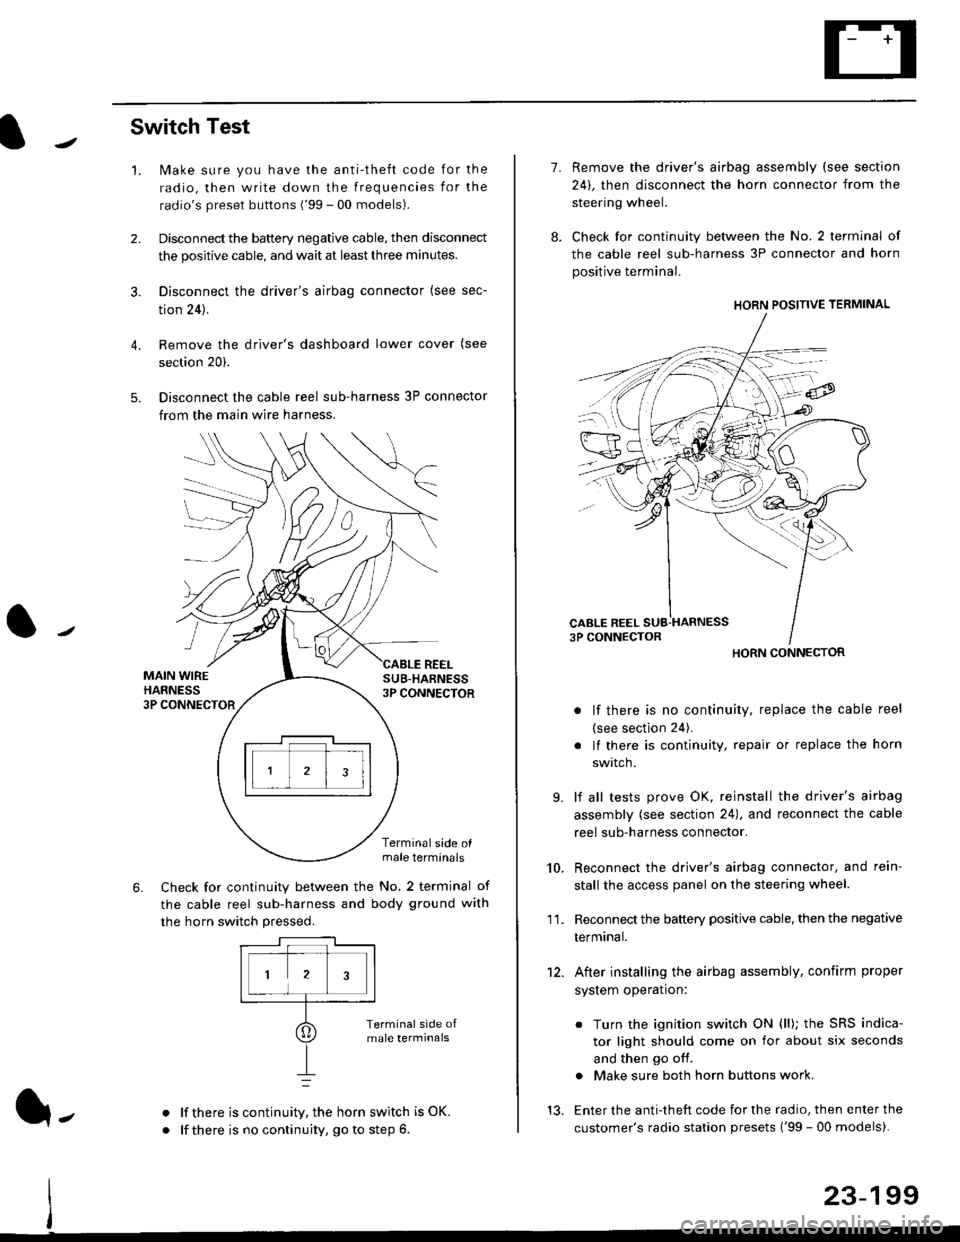 HONDA CIVIC 1999 6.G Workshop Manual Switch Test
lMake sure you have the anti-theft code for the
radio, then write down the frequencies for the
radios preset buttons (99 - 00 models).
Disconnect the battery negative cable, then disconn